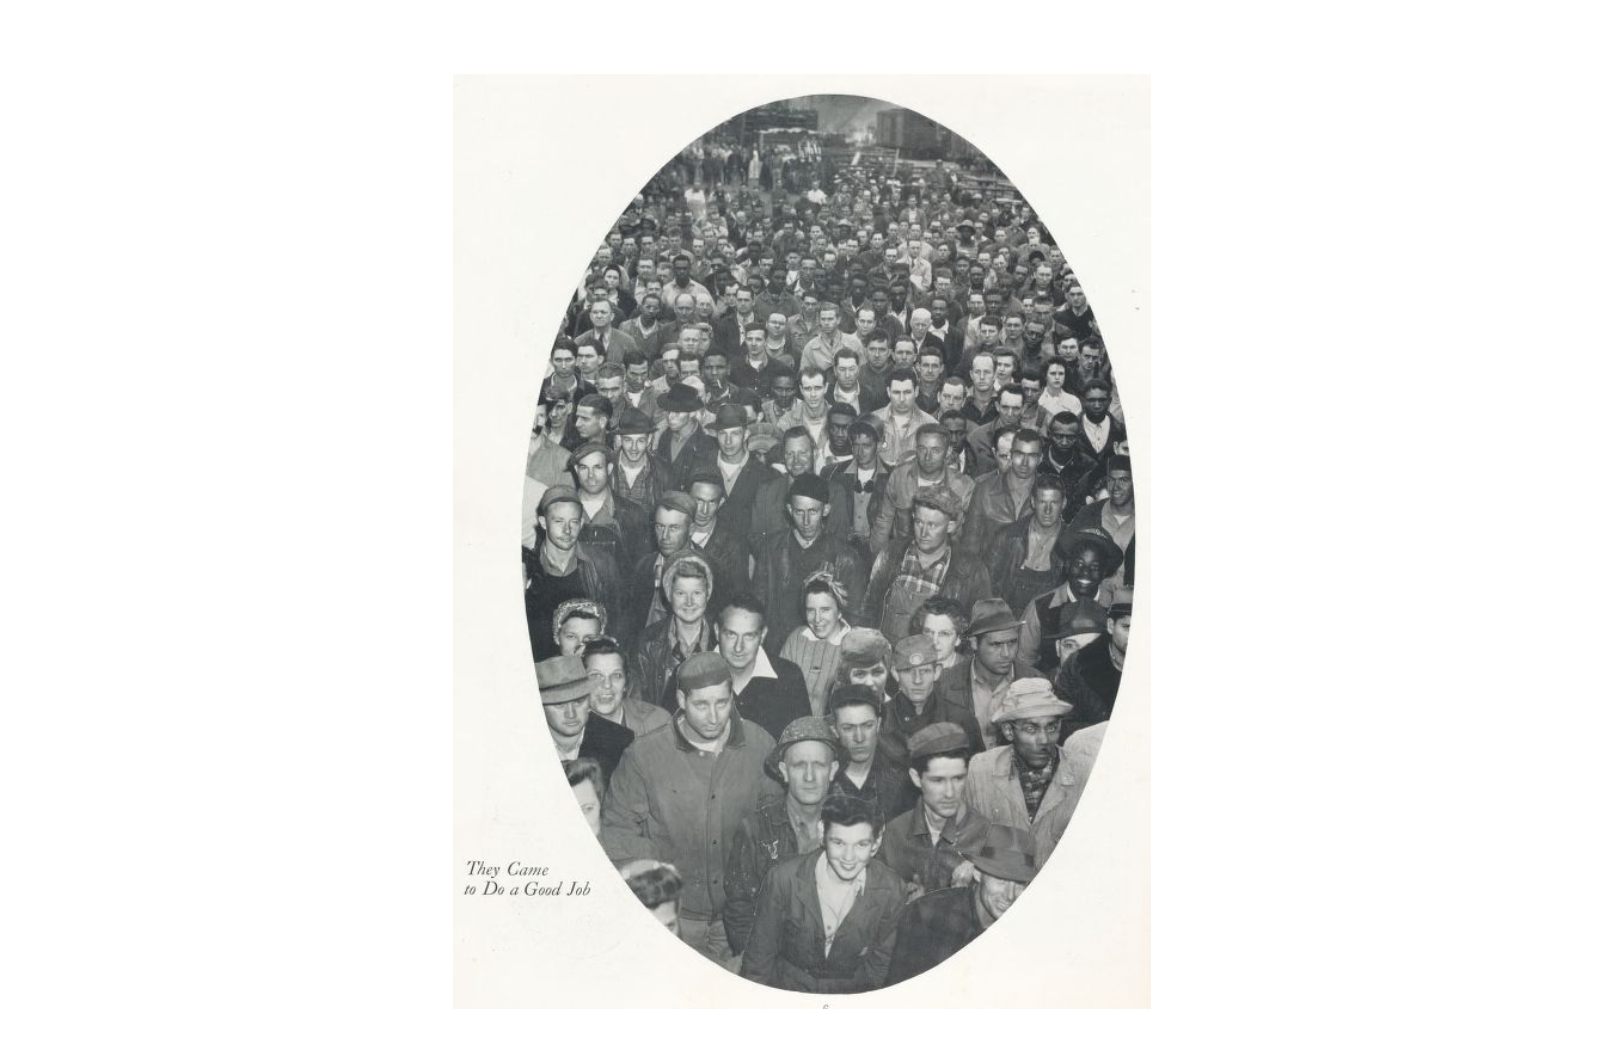 Page 6 of the booklet titled "Five Years of North Carolina Shipbuilding" features a button photograph of the employees.  The photograph has a caption reading, "They came to do a good job."